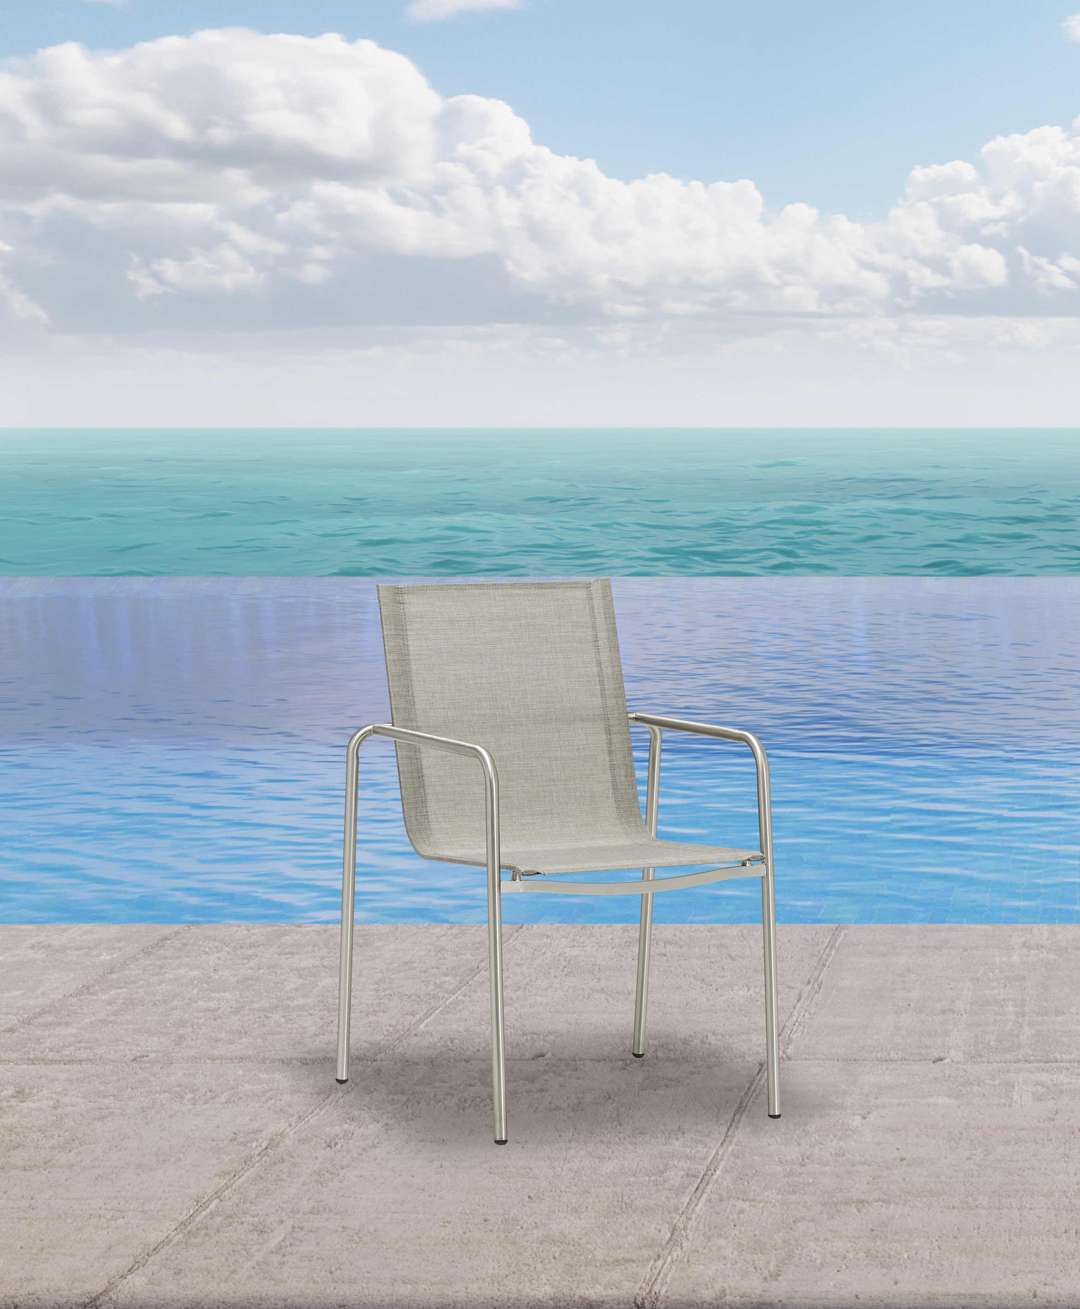 Paola Outdoor Dining Chair